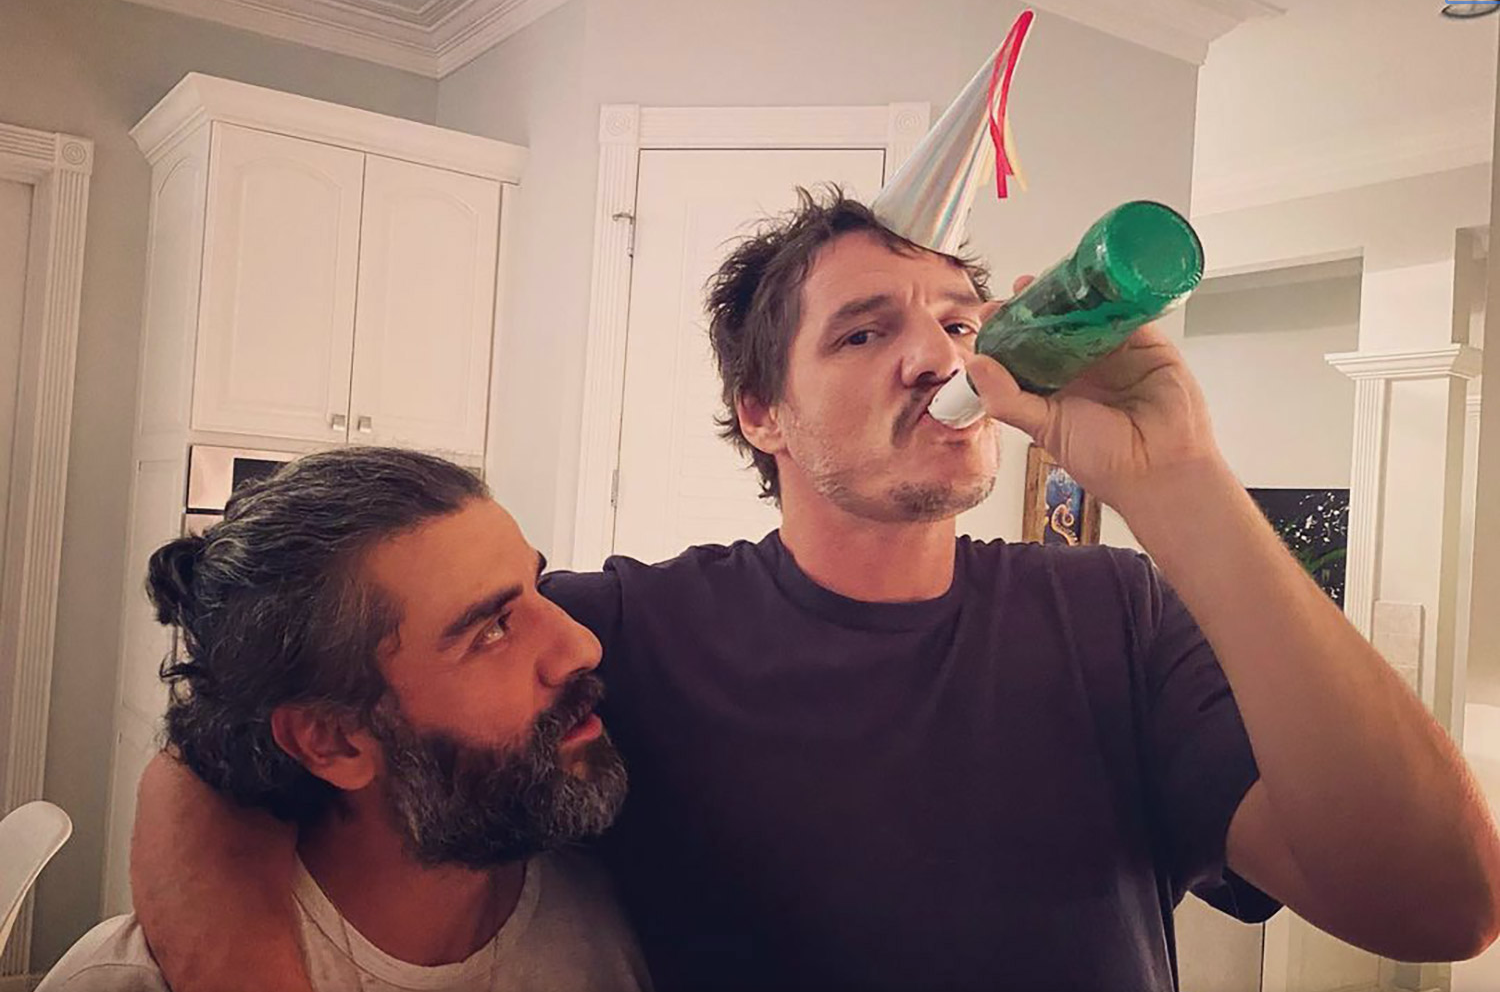 Poe Dameron And Din Djarin Ring In The New Year With Festive Instagram Post  — CultureSlate